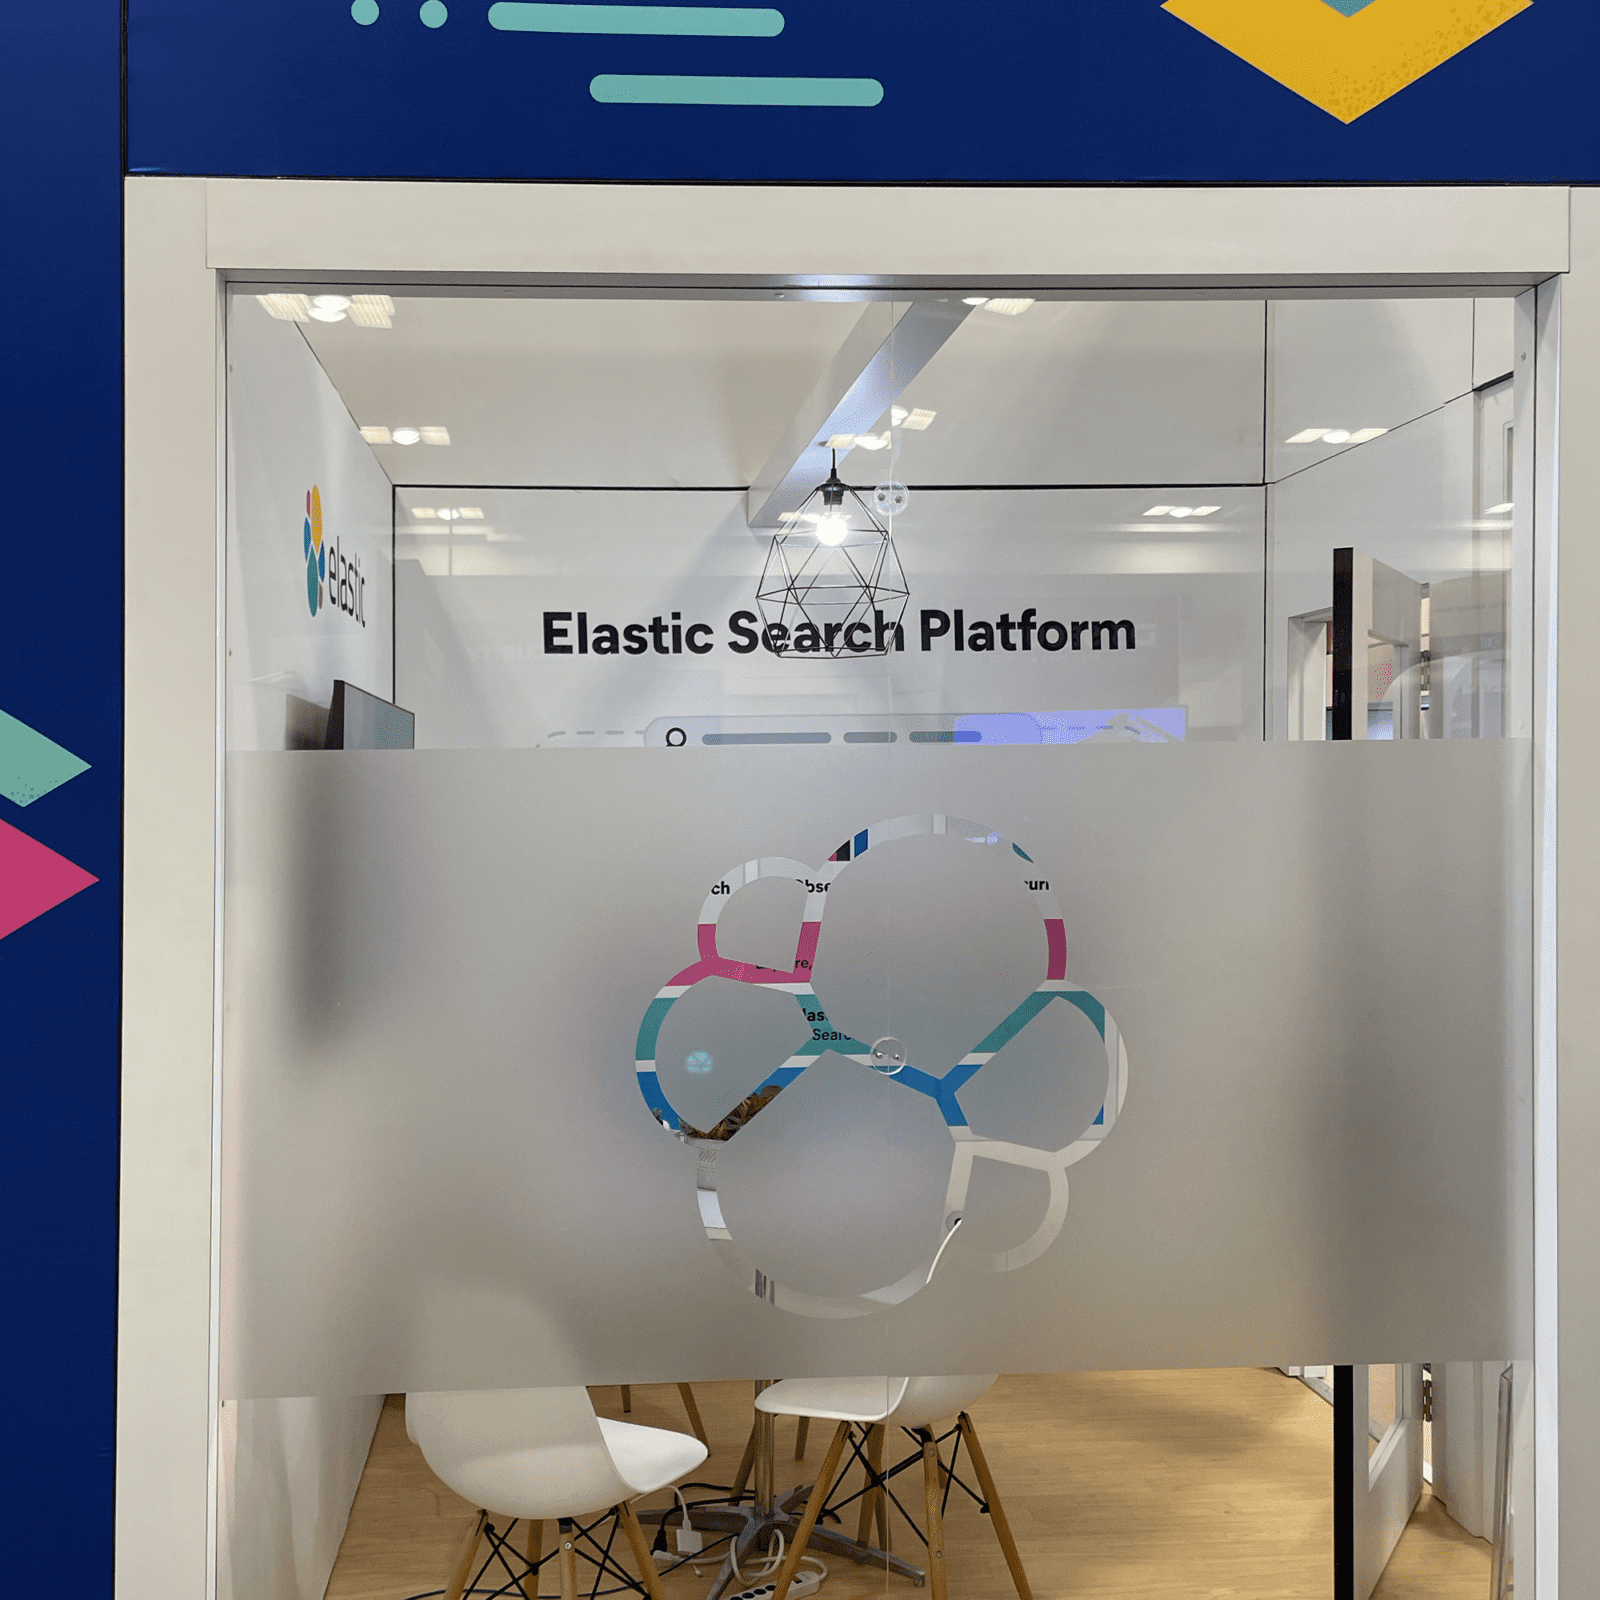 Elastic's conference room featured branded window glass